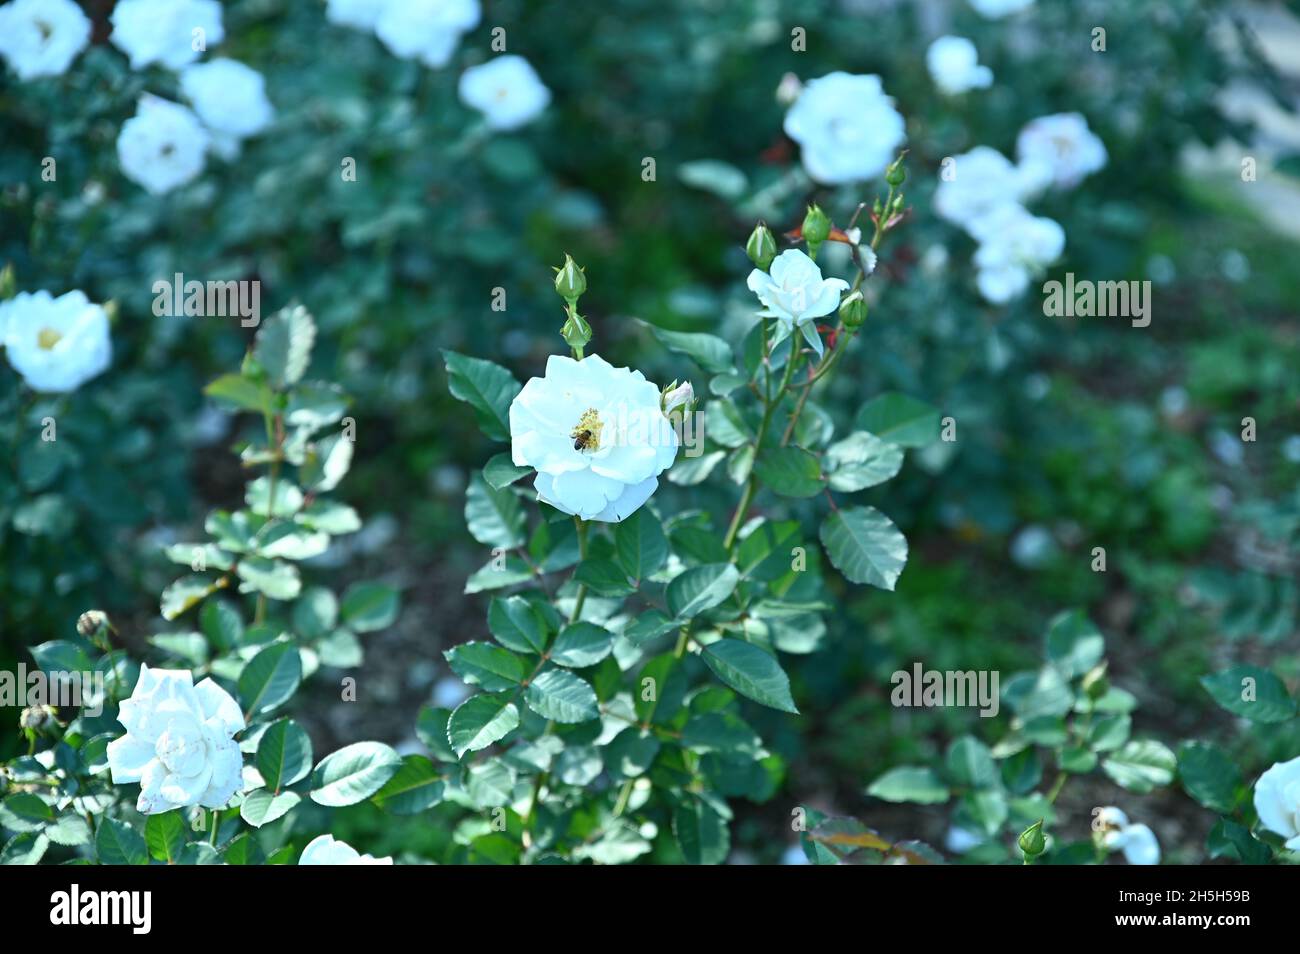 White roses bloom beautifully in the garden, and bees are working hard. Stock Photo